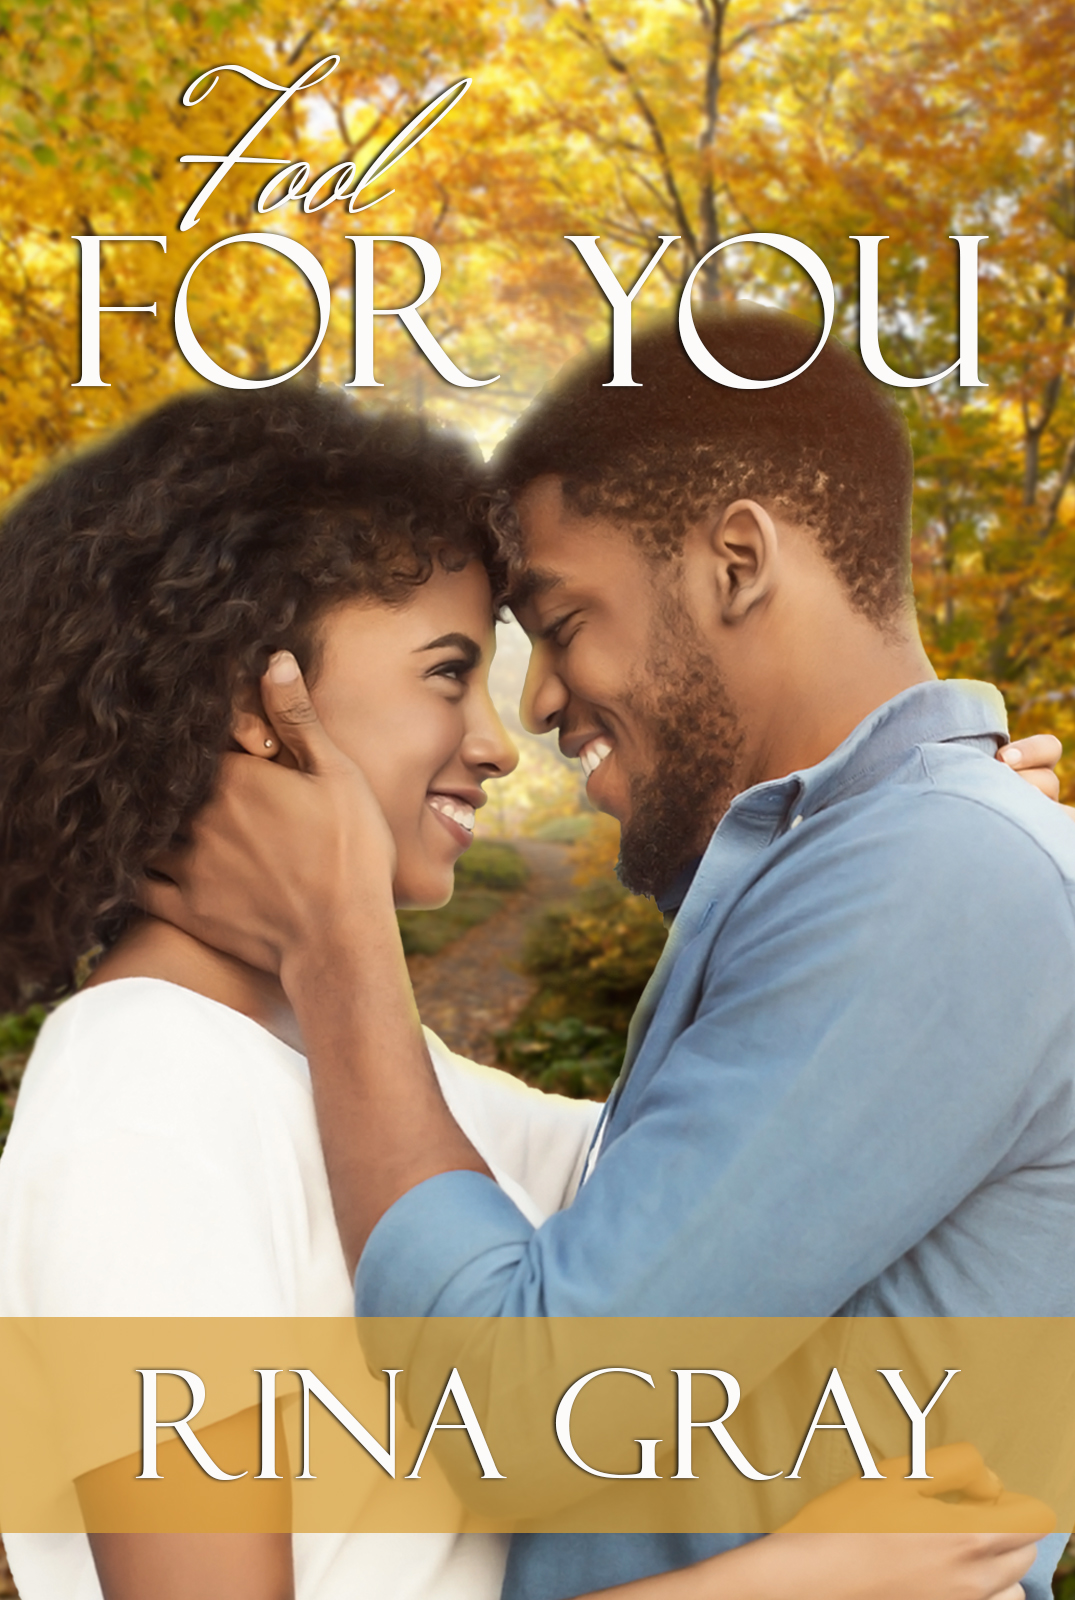 Rina Gray Fool for you book